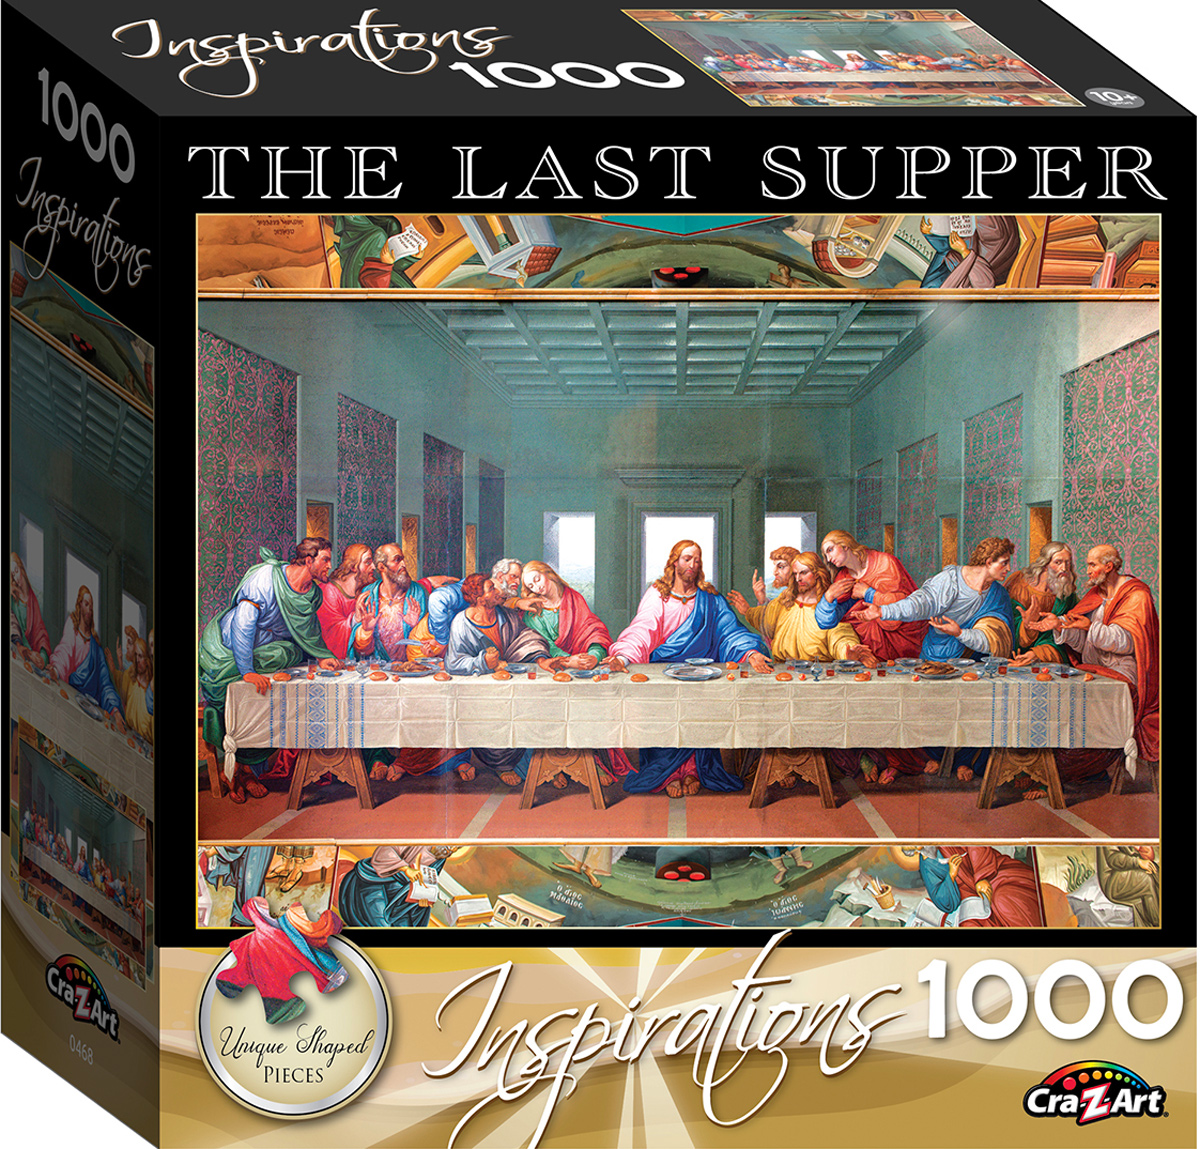 Inspirations - The Last Supper